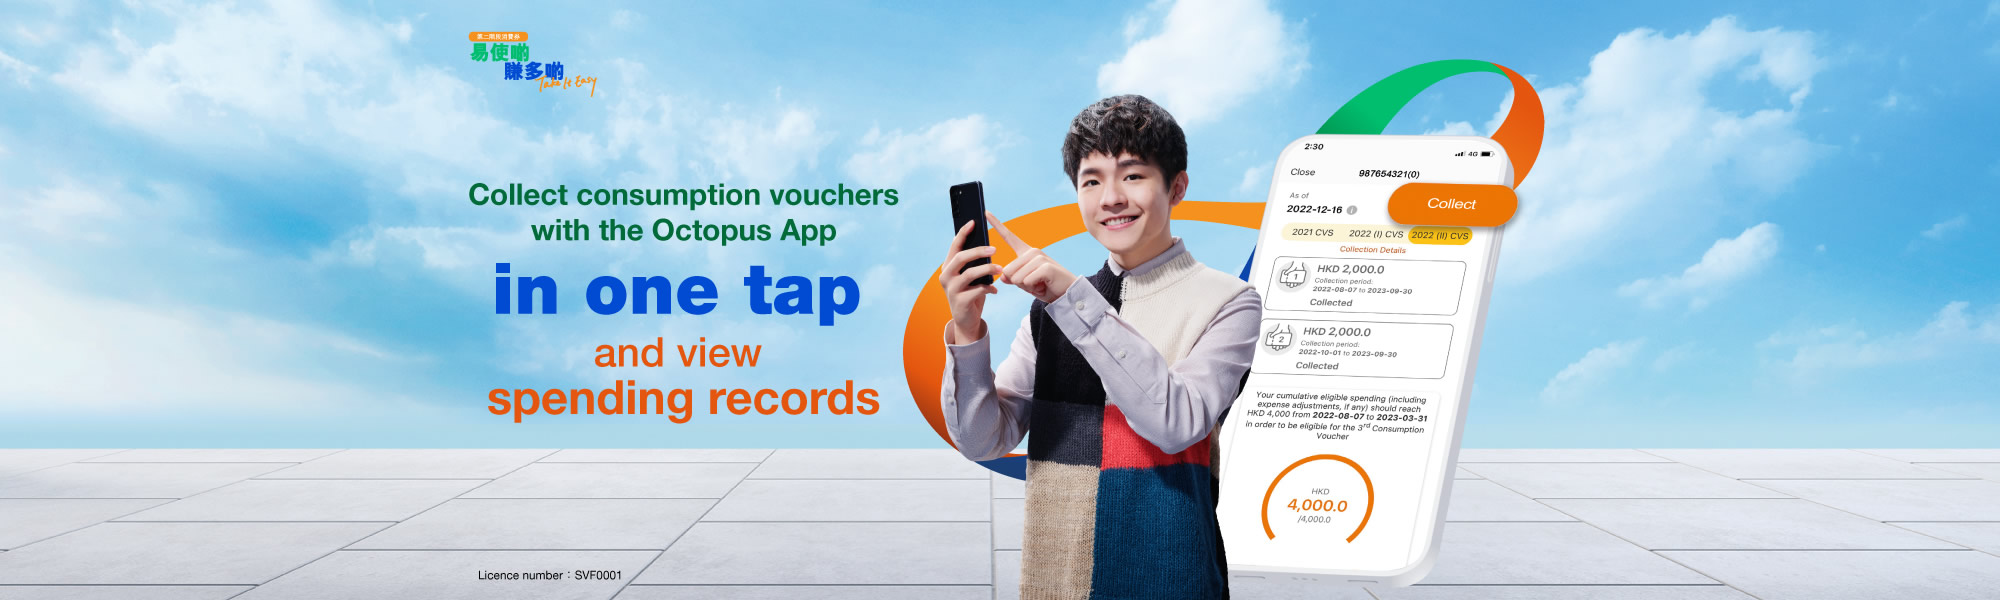 Collect consumption vouchers with the Octopus App in one tap and view spending records